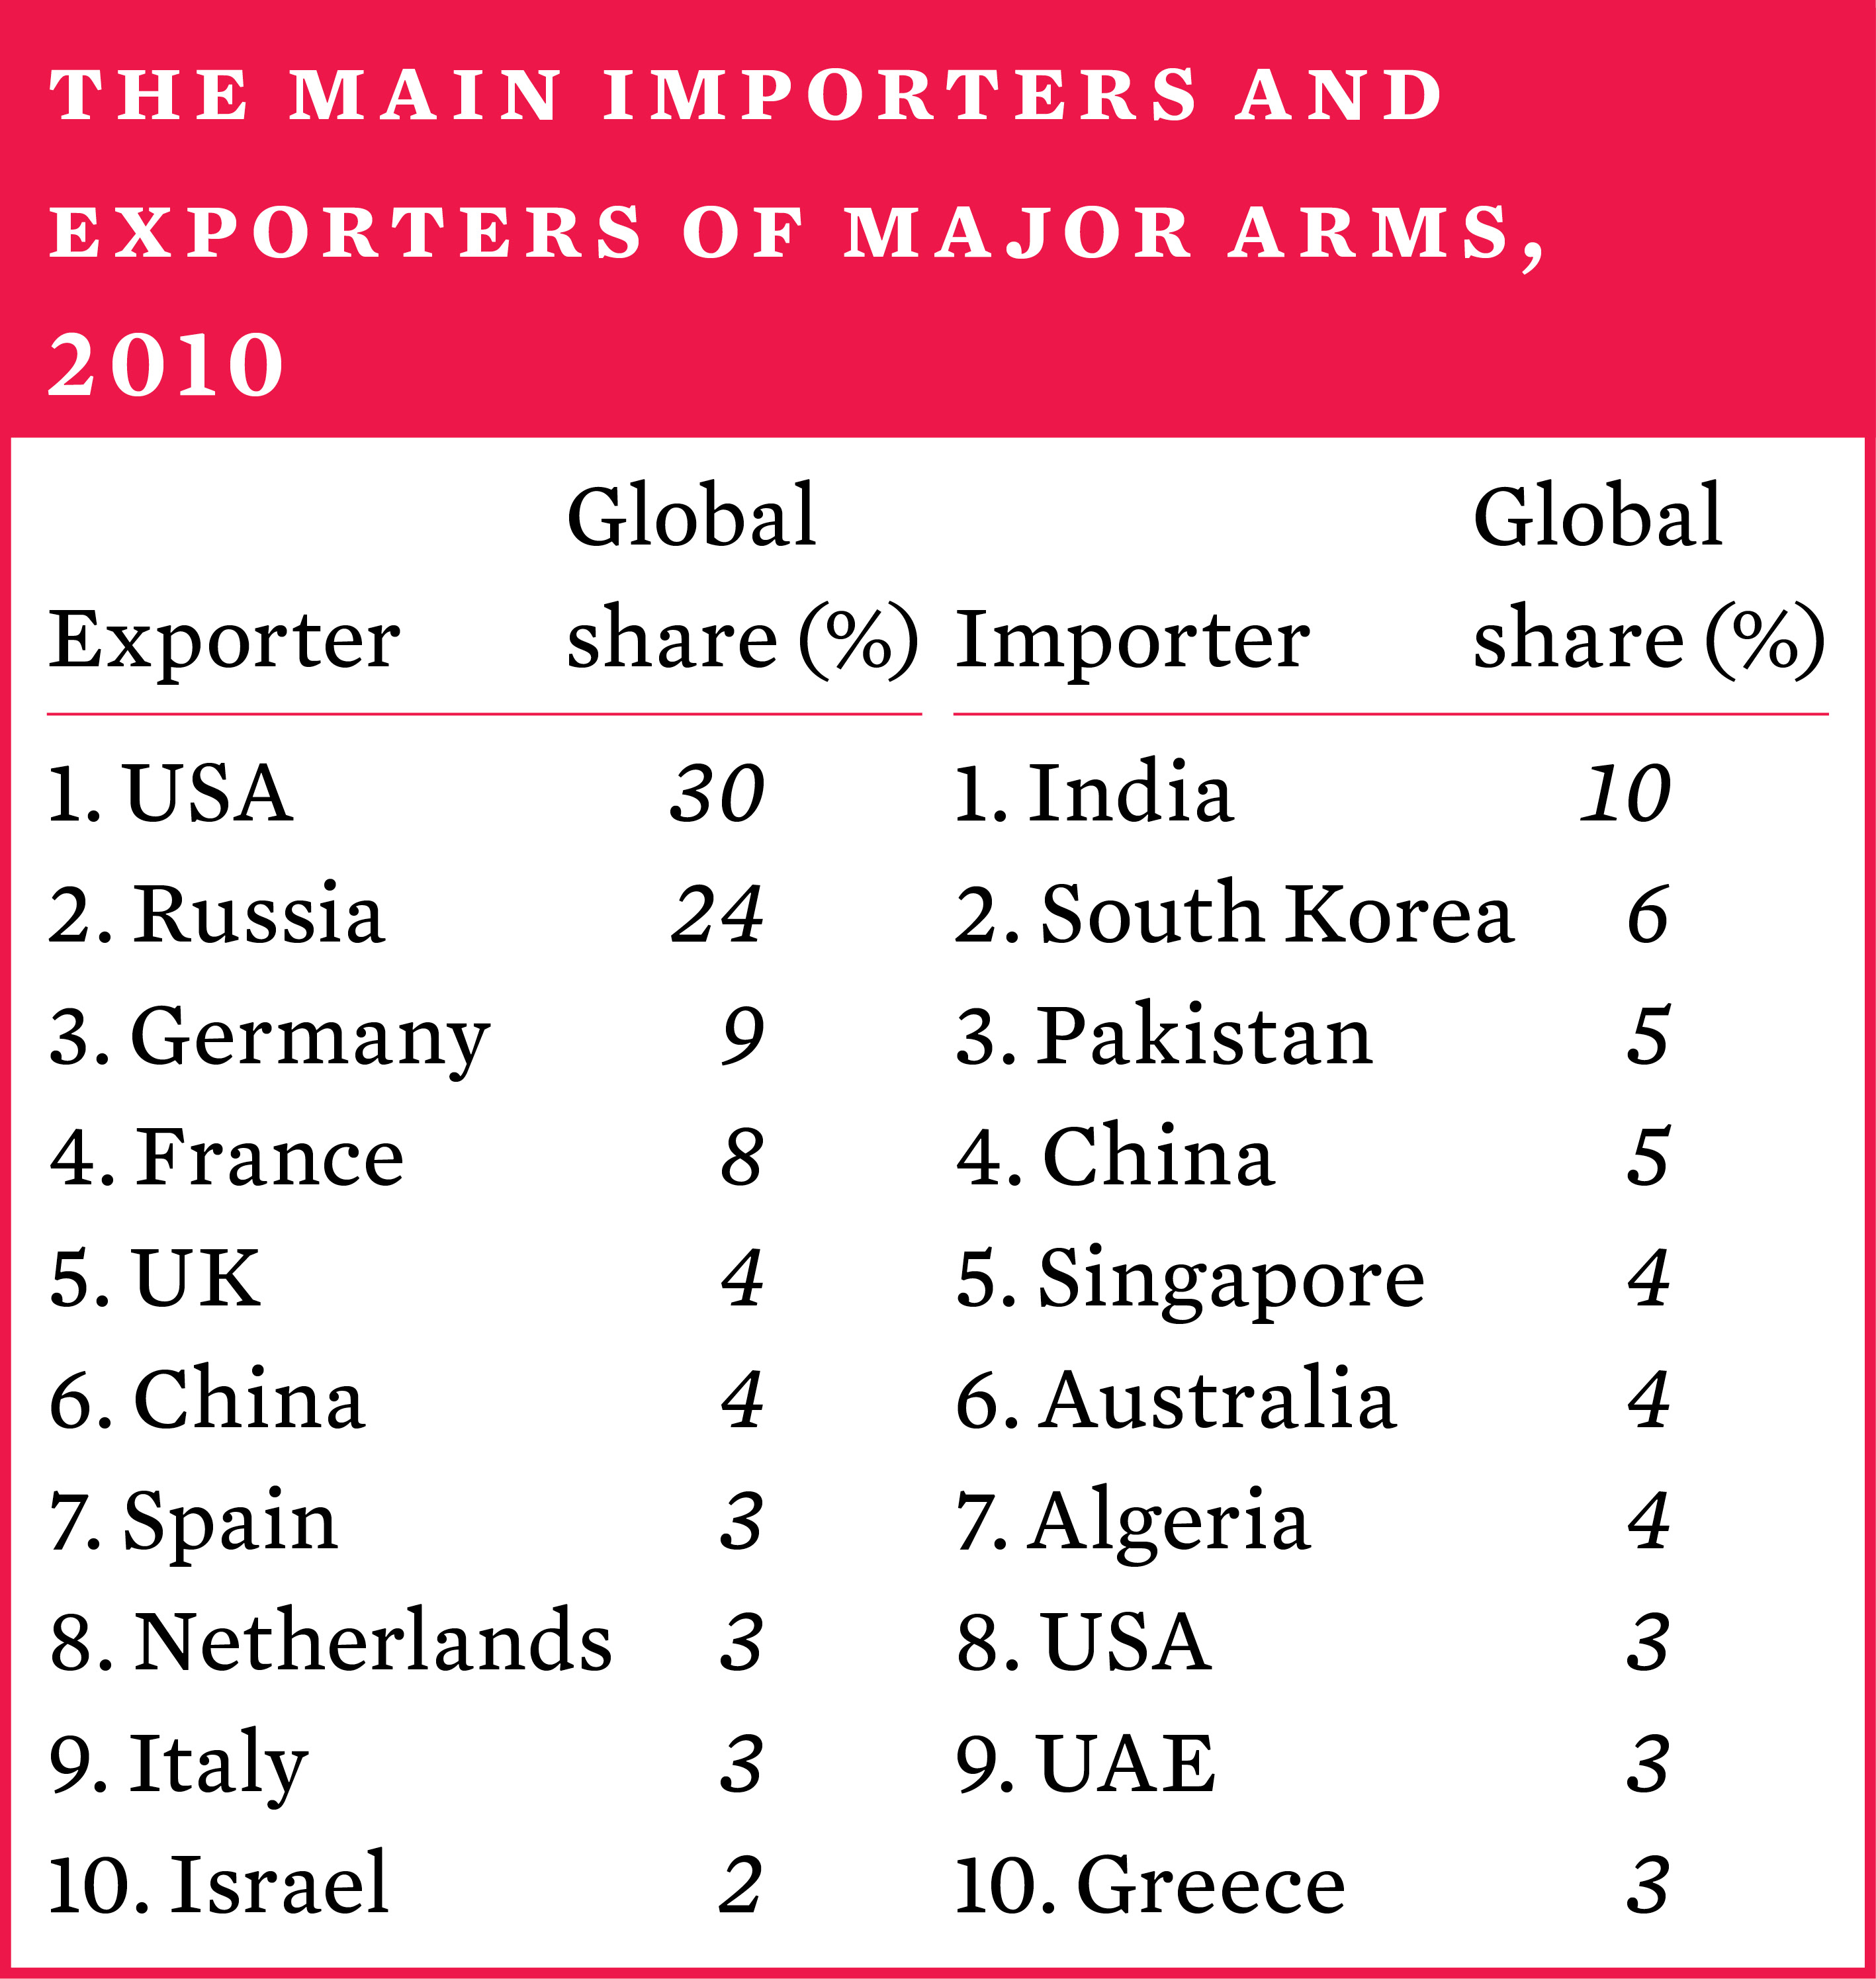 The main importers and exporters of major arms, 2010